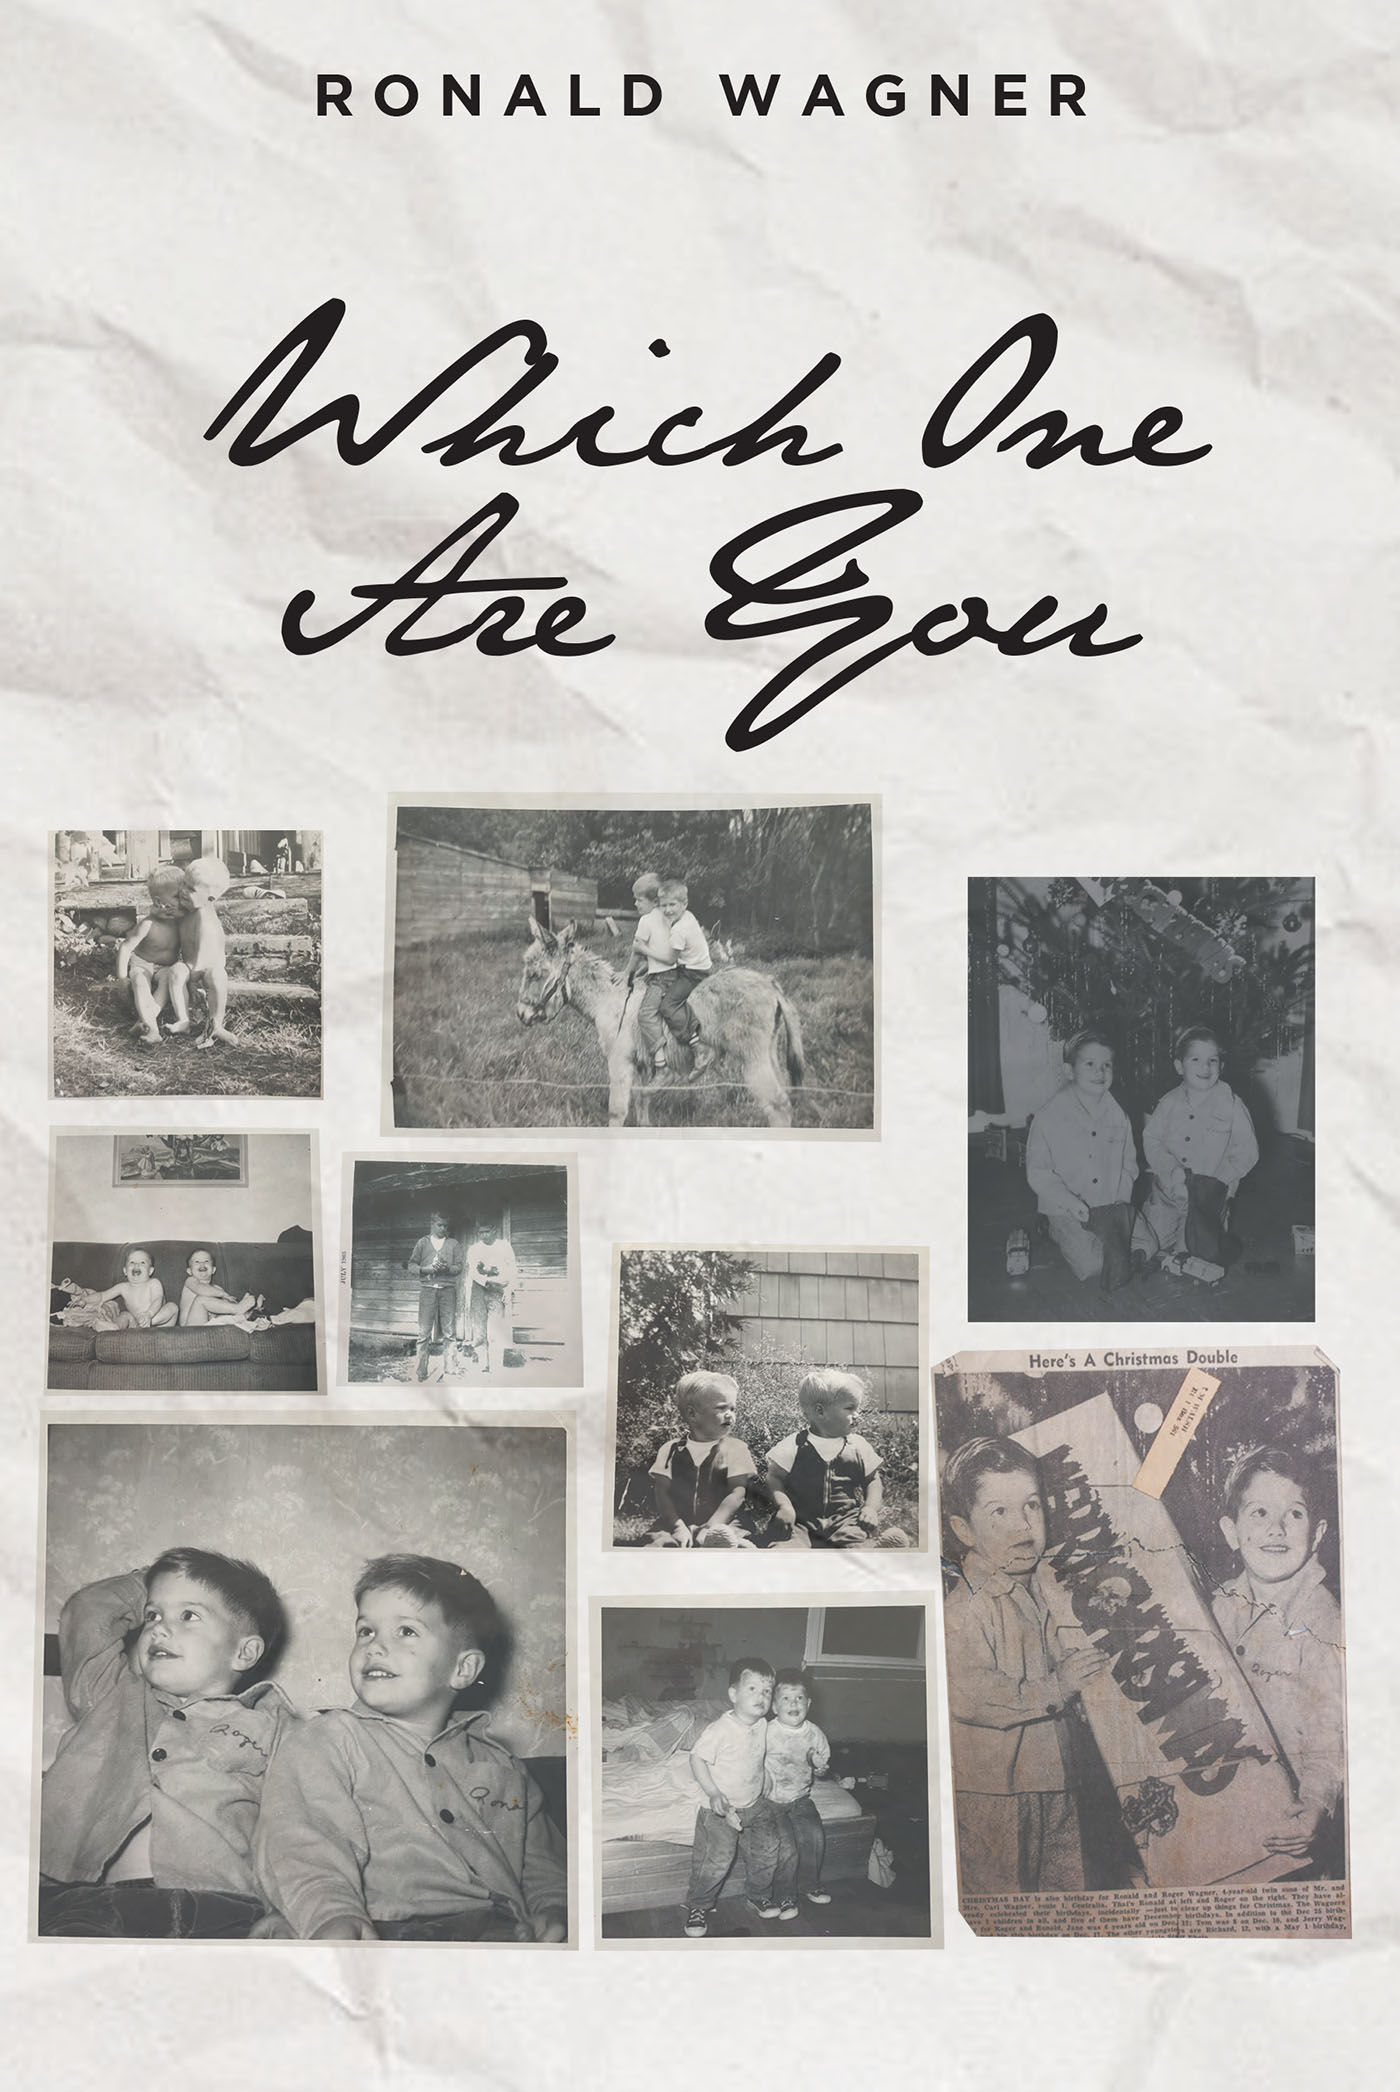 Ronald Wagner’s New Book, "Which One Are You," is a Spellbinding Account of the Author's Life That Explores the Struggles and Challenges He and His Family Endured